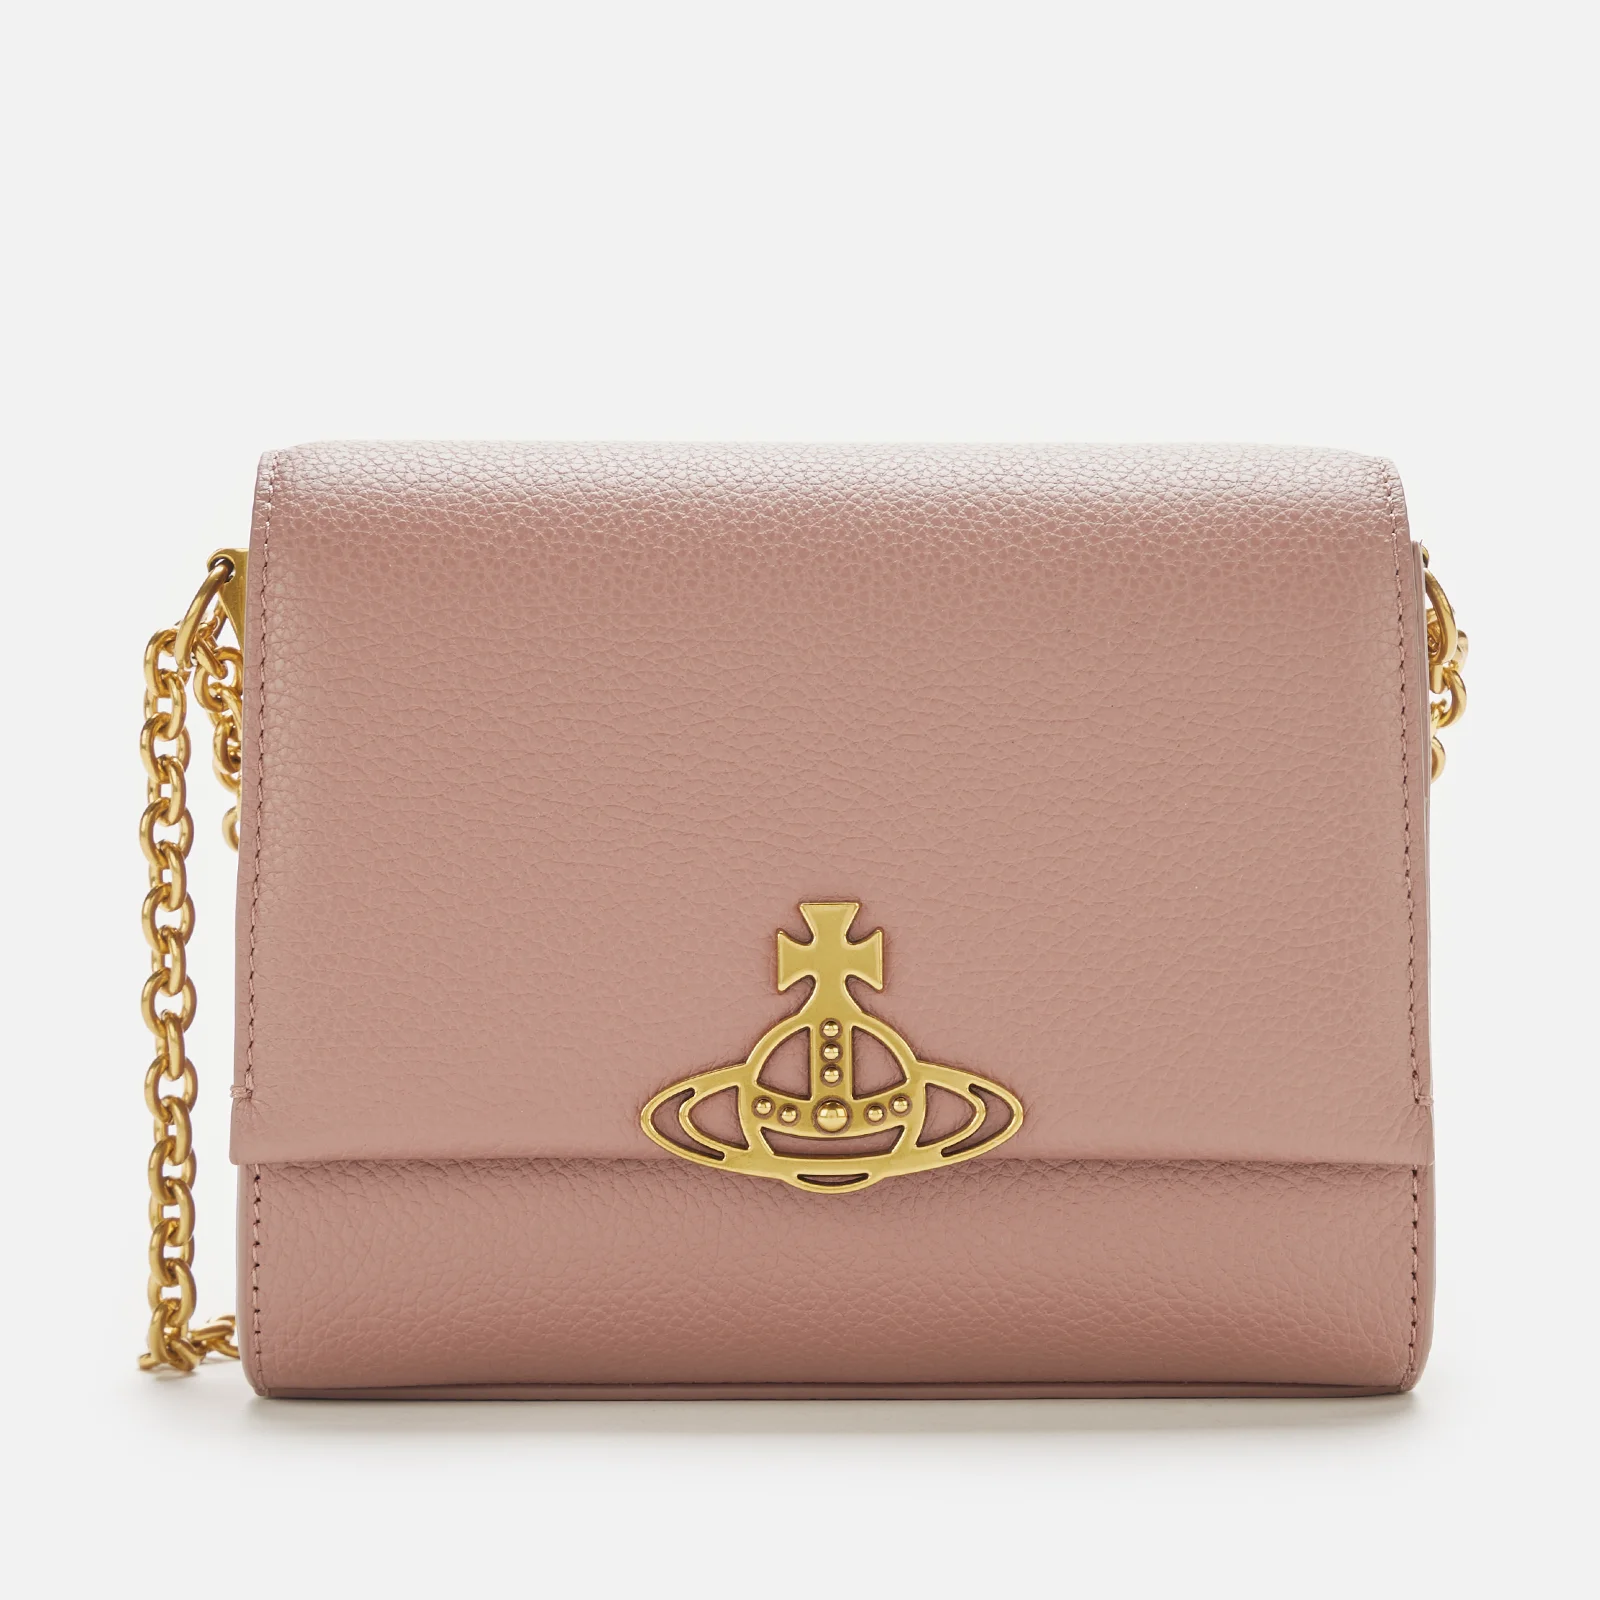 Vivienne Westwood Women's Lucy Small Cross Body Bag - Pink Image 1